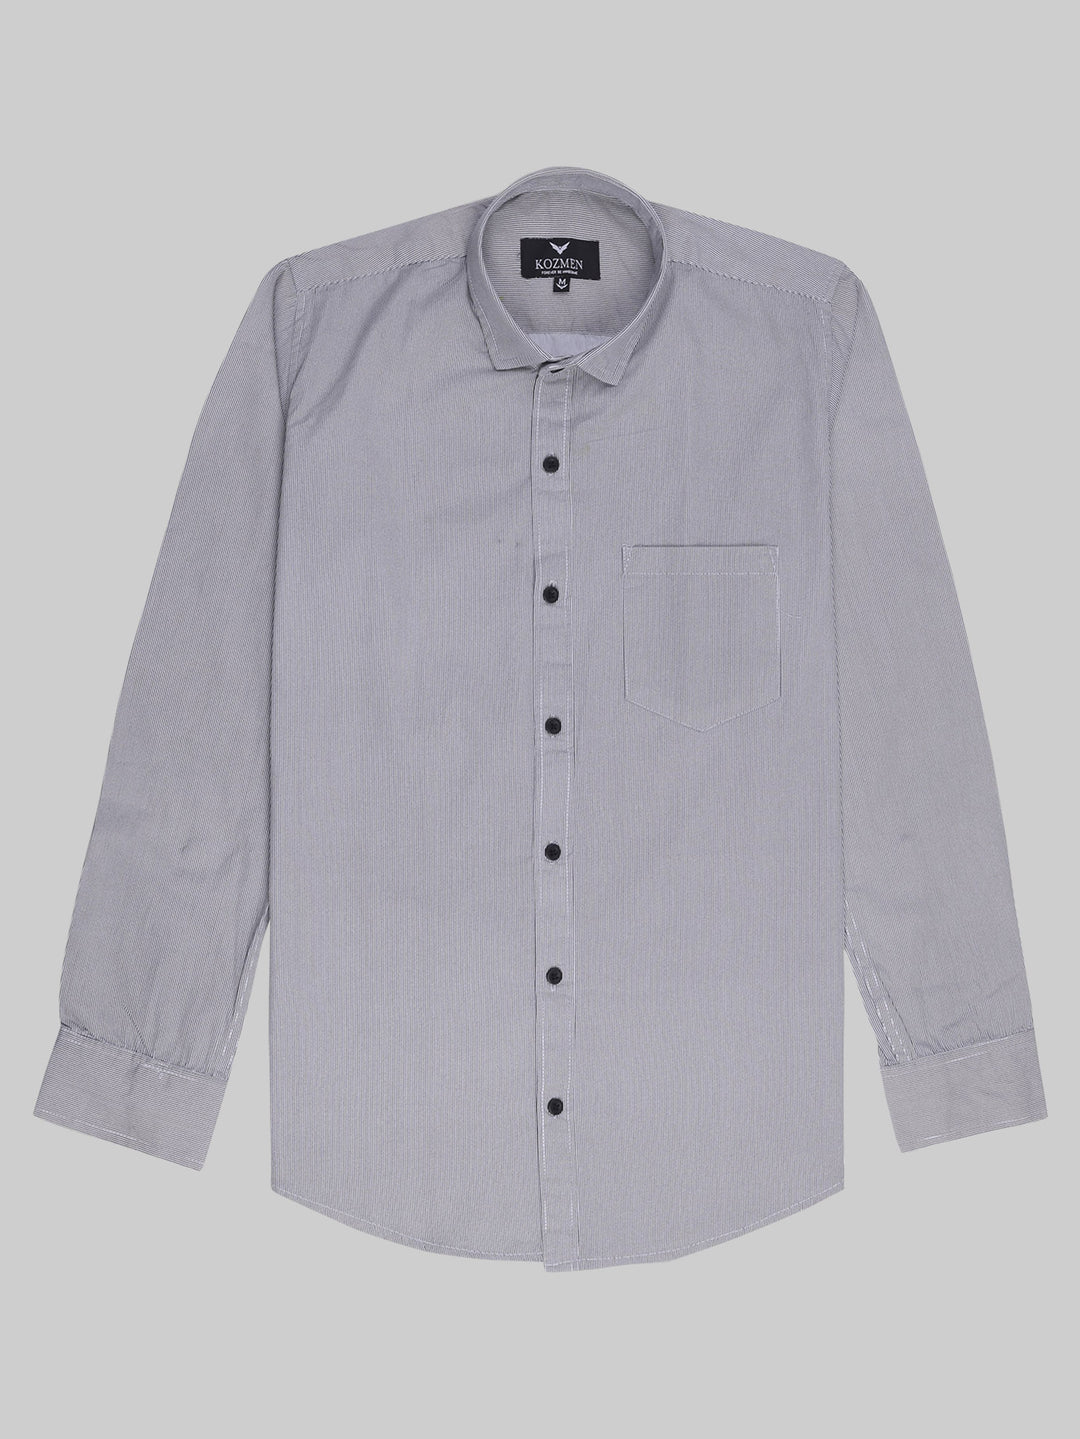 Grey Banker Striped Mens Cotton Casual Shirt